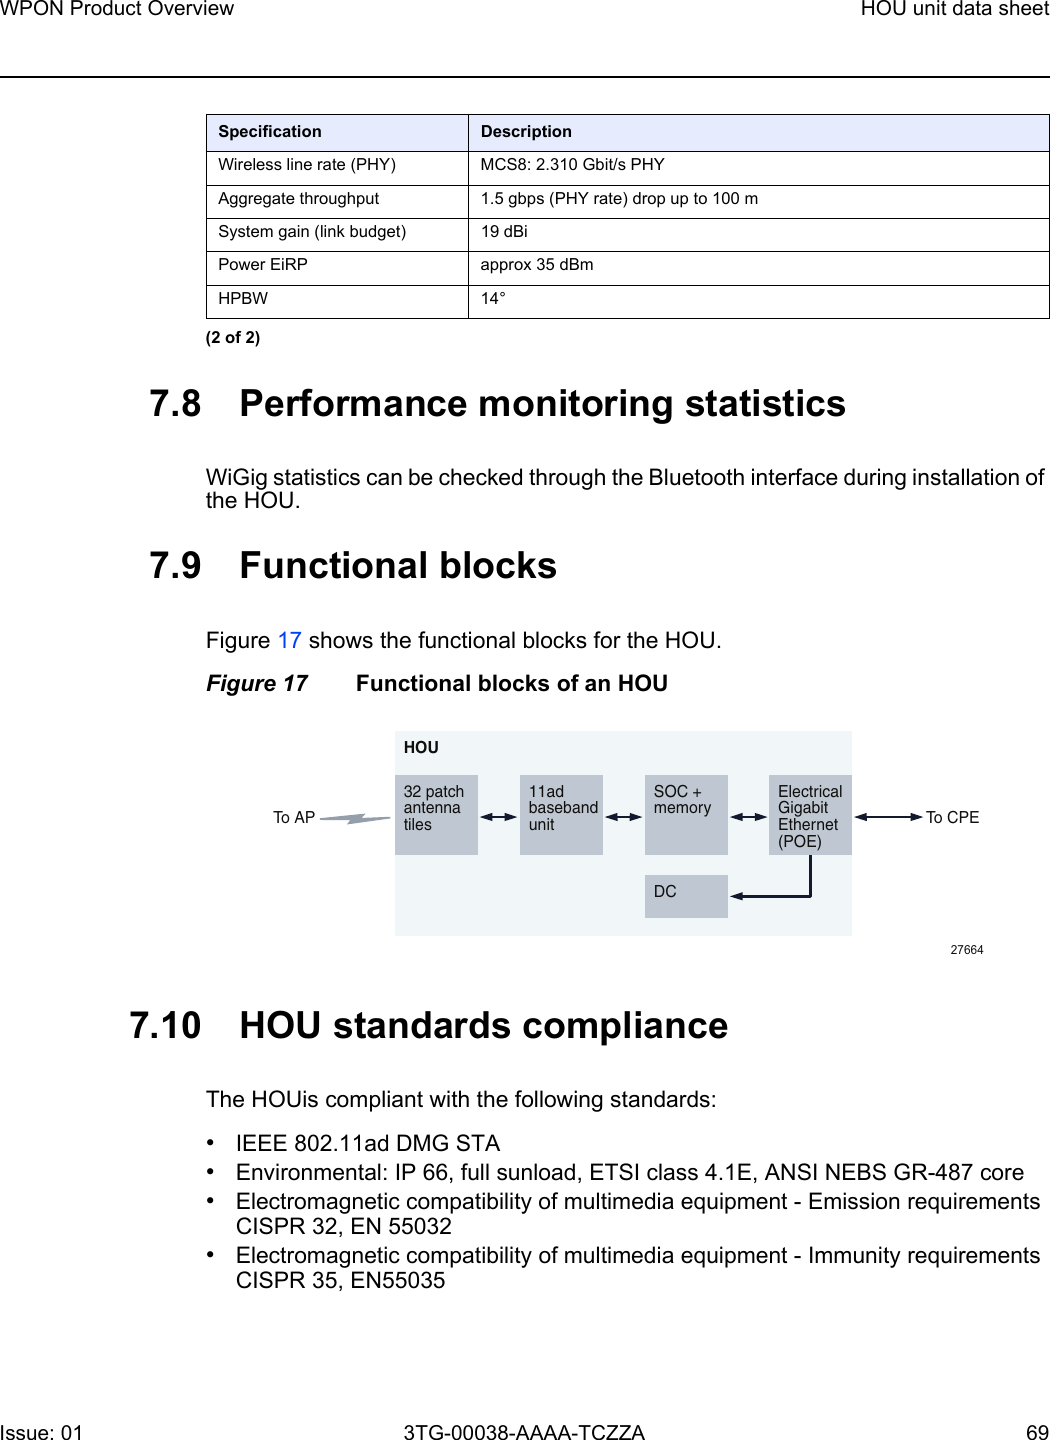 WPON Product Overview HOU unit data sheetIssue: 01 3TG-00038-AAAA-TCZZA 69 7.8 Performance monitoring statisticsWiGig statistics can be checked through the Bluetooth interface during installation of the HOU.7.9 Functional blocksFigure 17 shows the functional blocks for the HOU. Figure 17 Functional blocks of an HOU7.10 HOU standards complianceThe HOUis compliant with the following standards: •IEEE 802.11ad DMG STA•Environmental: IP 66, full sunload, ETSI class 4.1E, ANSI NEBS GR-487 core•Electromagnetic compatibility of multimedia equipment - Emission requirements CISPR 32, EN 55032•Electromagnetic compatibility of multimedia equipment - Immunity requirements CISPR 35, EN55035Wireless line rate (PHY) MCS8: 2.310 Gbit/s PHYAggregate throughput 1.5 gbps (PHY rate) drop up to 100 mSystem gain (link budget) 19 dBi Power EiRP approx 35 dBm HPBW 14°Specification Description(2 of 2)ElectricalGigabitEthernet(POE)To CPETo APSOC +memoryDC11adbasebandunit32 patchantennatilesHOU27664